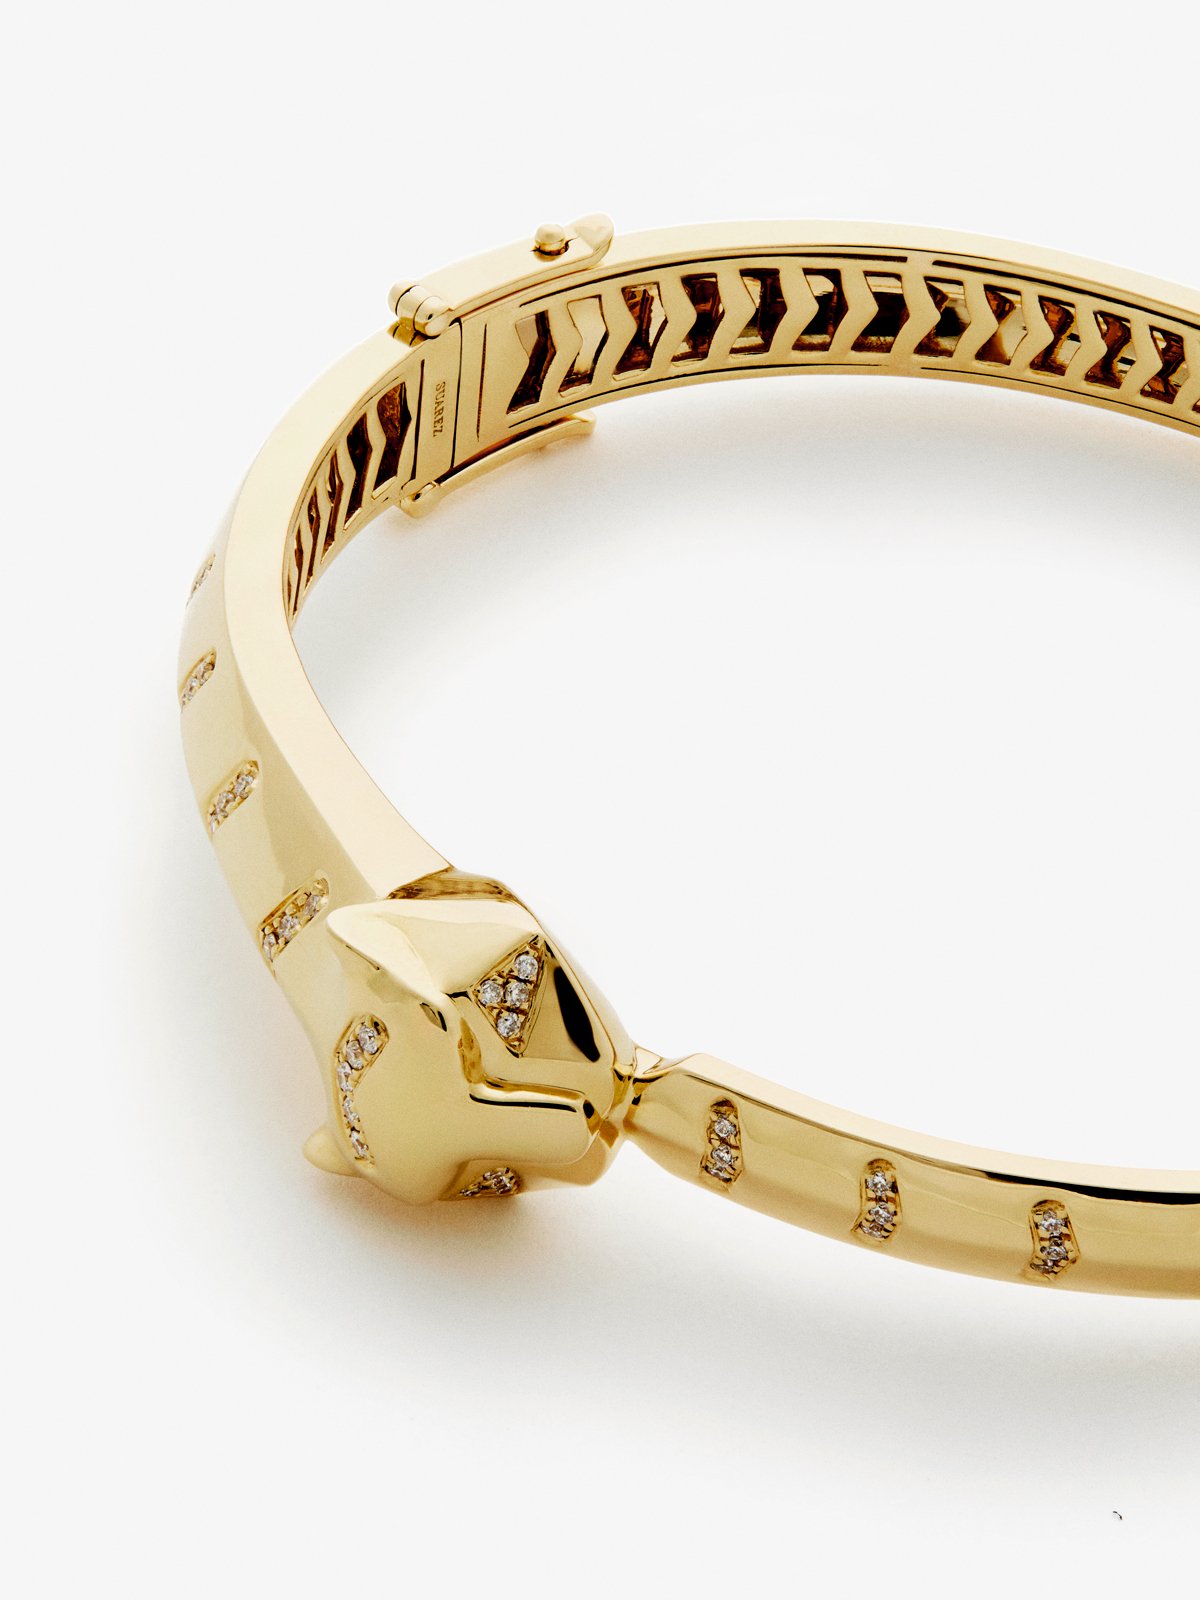 Rigid 18K yellow gold bracelet with 61 brilliant-cut diamonds with a total of 0.23 cts and a tiger shape